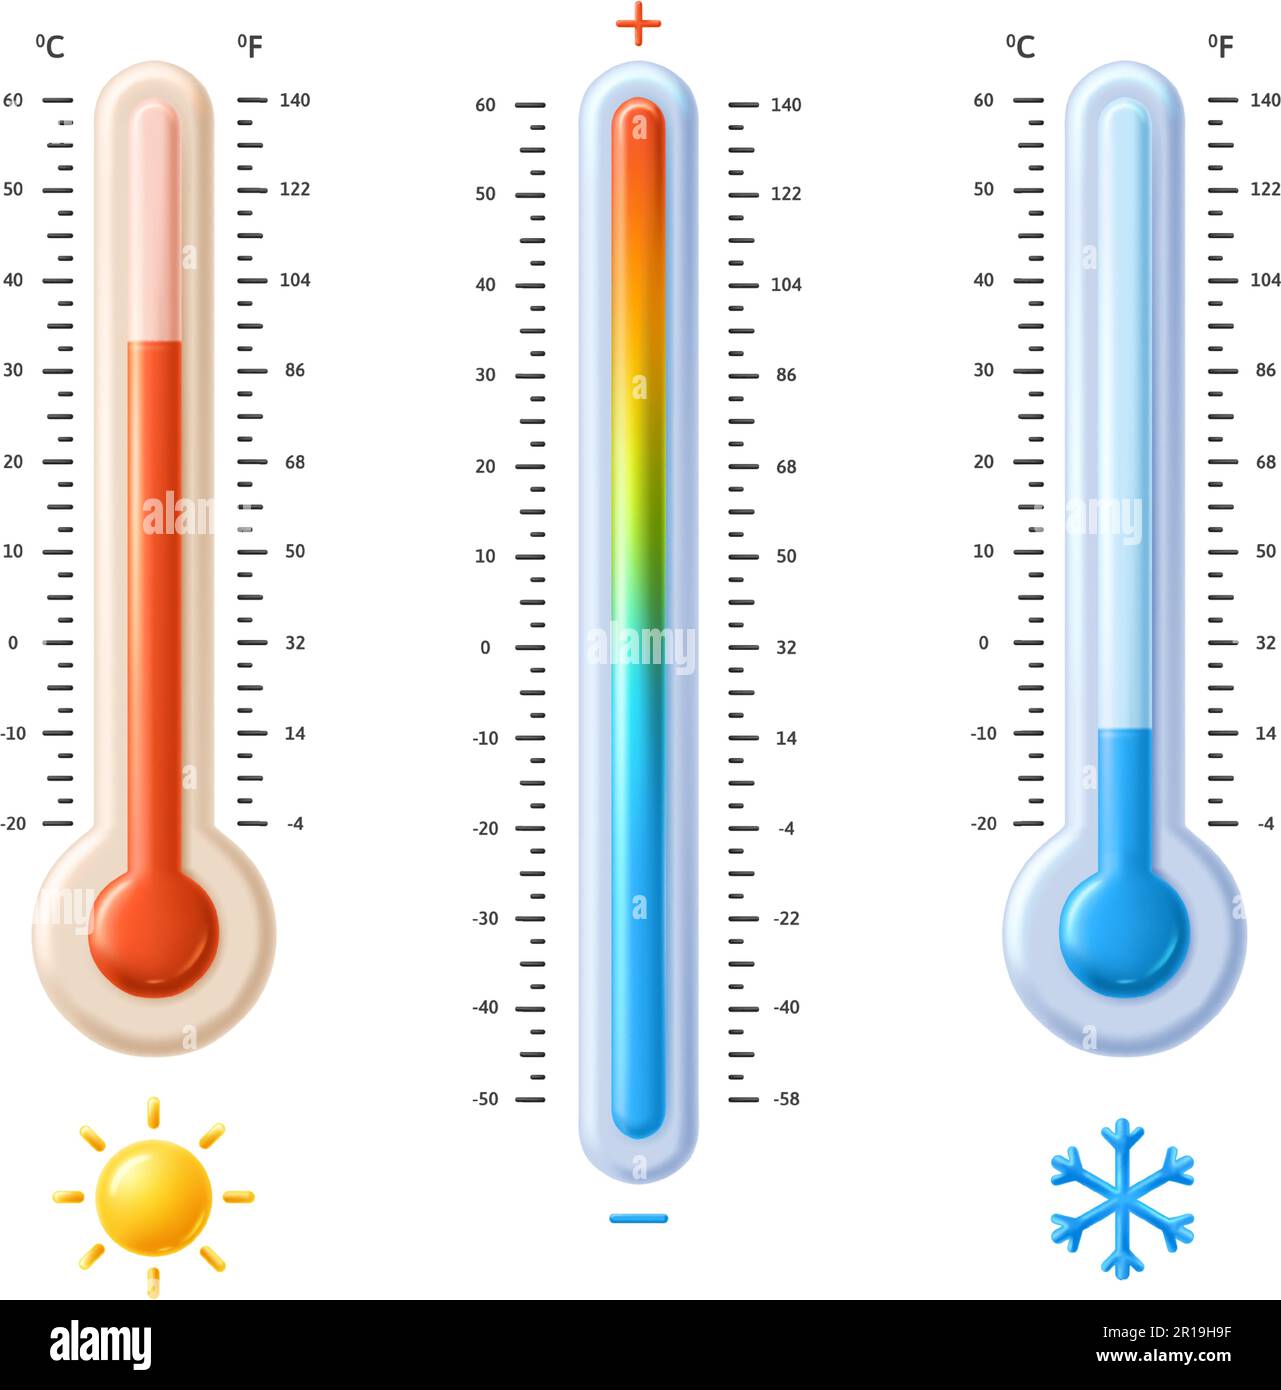 Premium Vector  Cold warm thermometer. temperature weather thermometers  with celsius and fahrenheit scale. thermostat meteorology icon